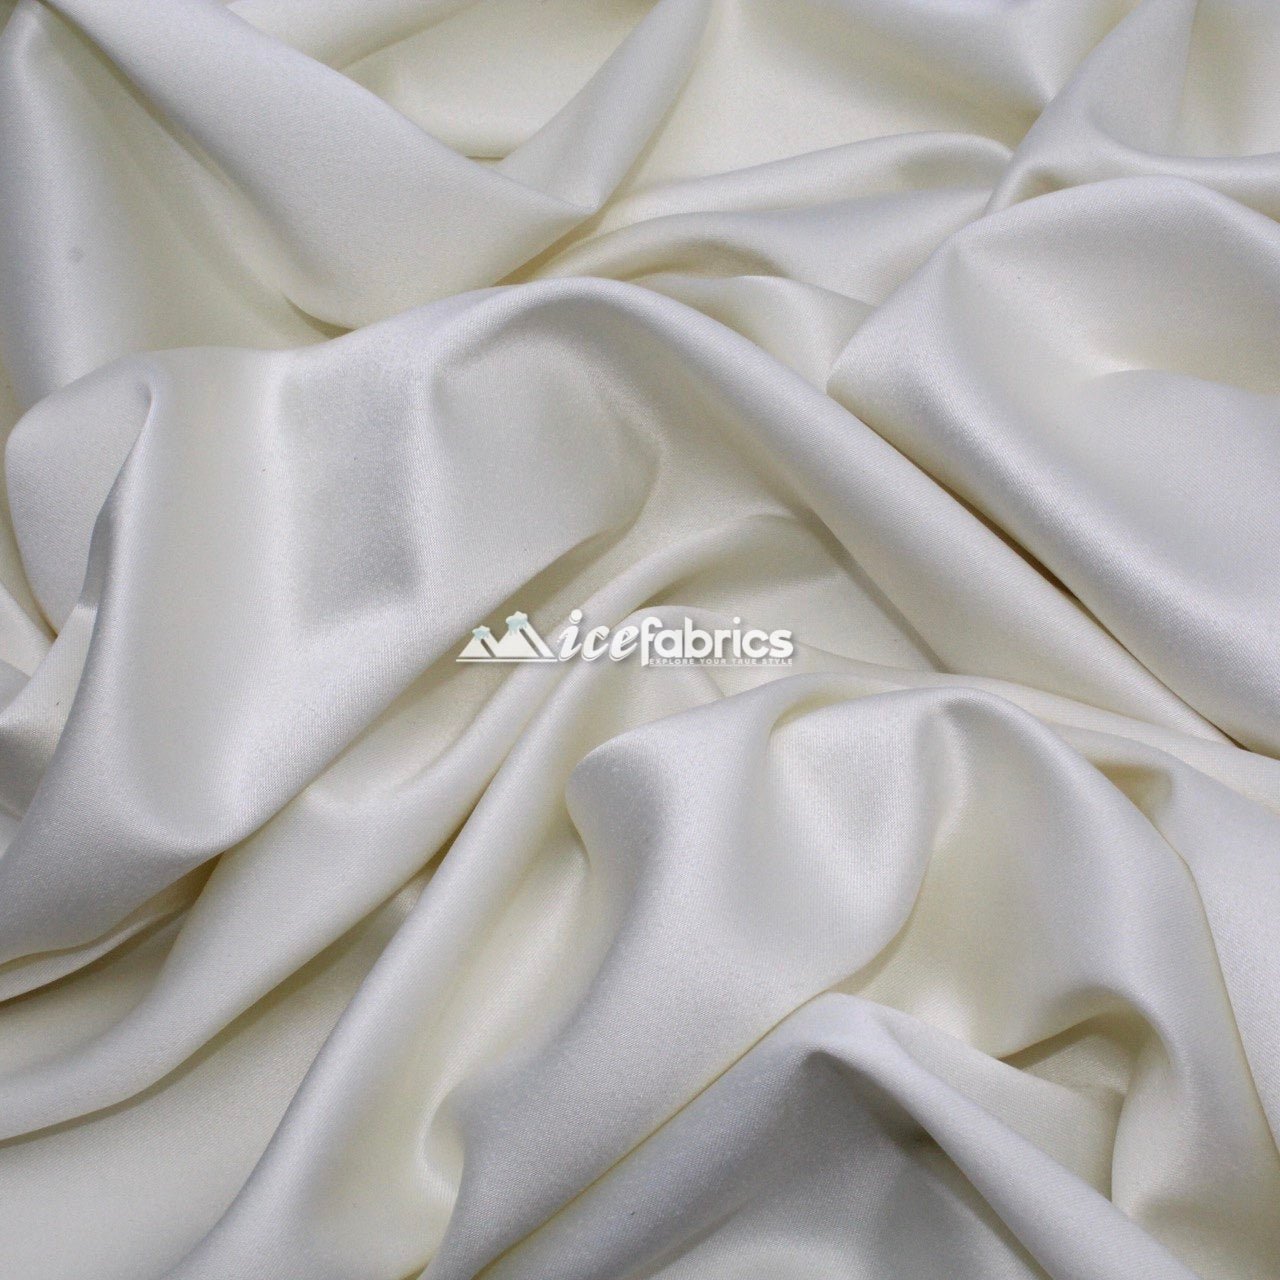 Armani Thick Solid Color Silky Stretch Satin Fabric Sold By The YardSatin FabricICE FABRICSICE FABRICSChampagneArmani Thick Solid Color Silky Stretch Satin Fabric Sold By The Yard ICE FABRICS Ivory